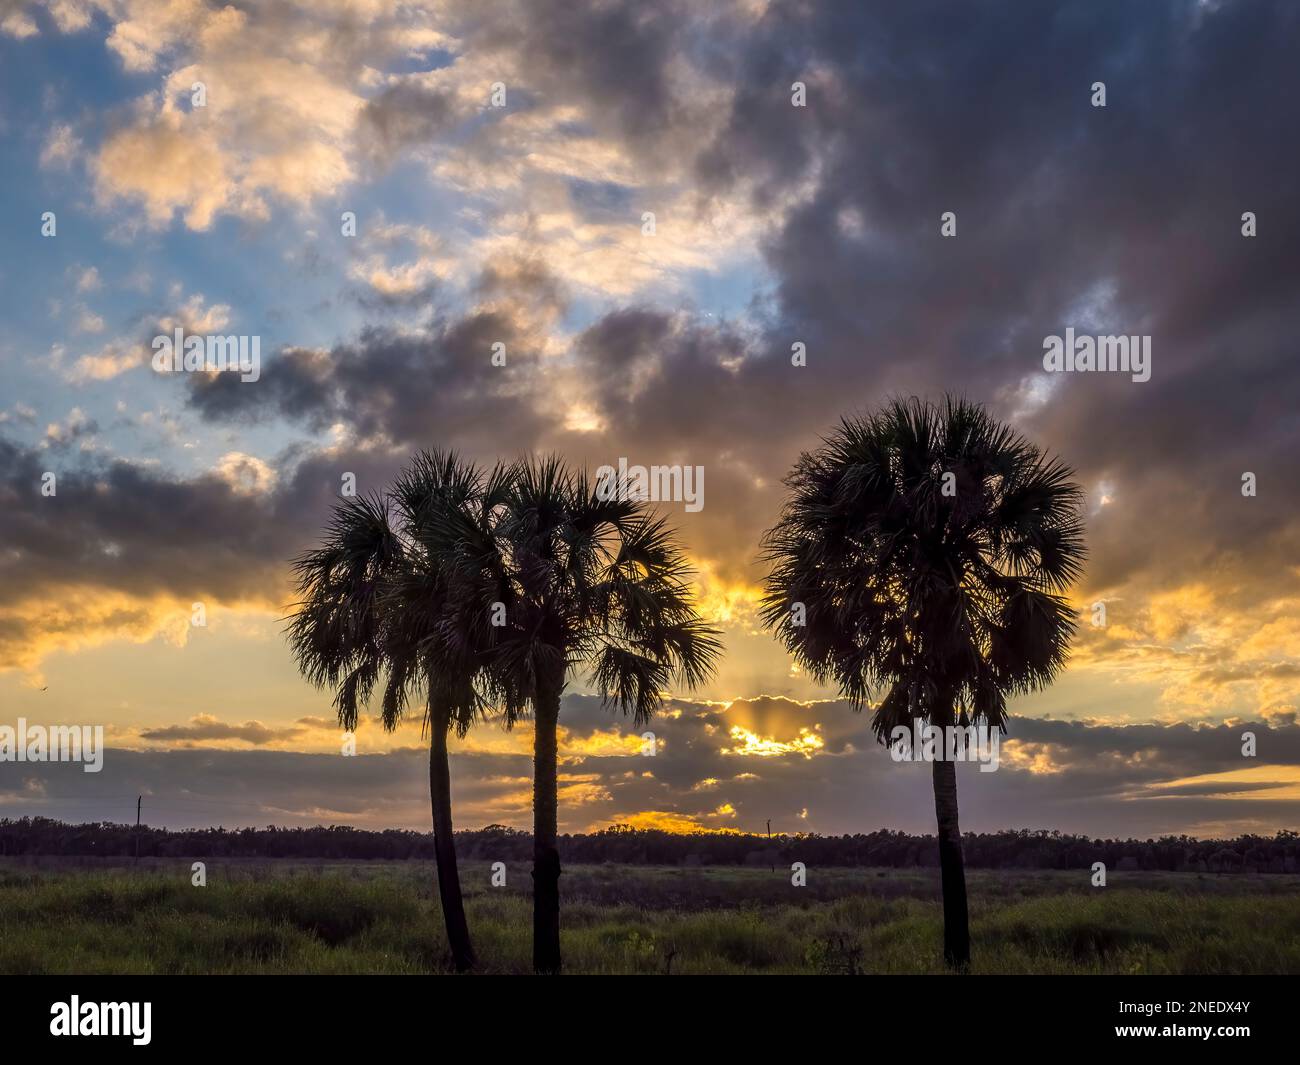 Palm trees silhouetted aganist a sunset sky in Myakka River State Park in Sarasota Florida USA Stock Photo